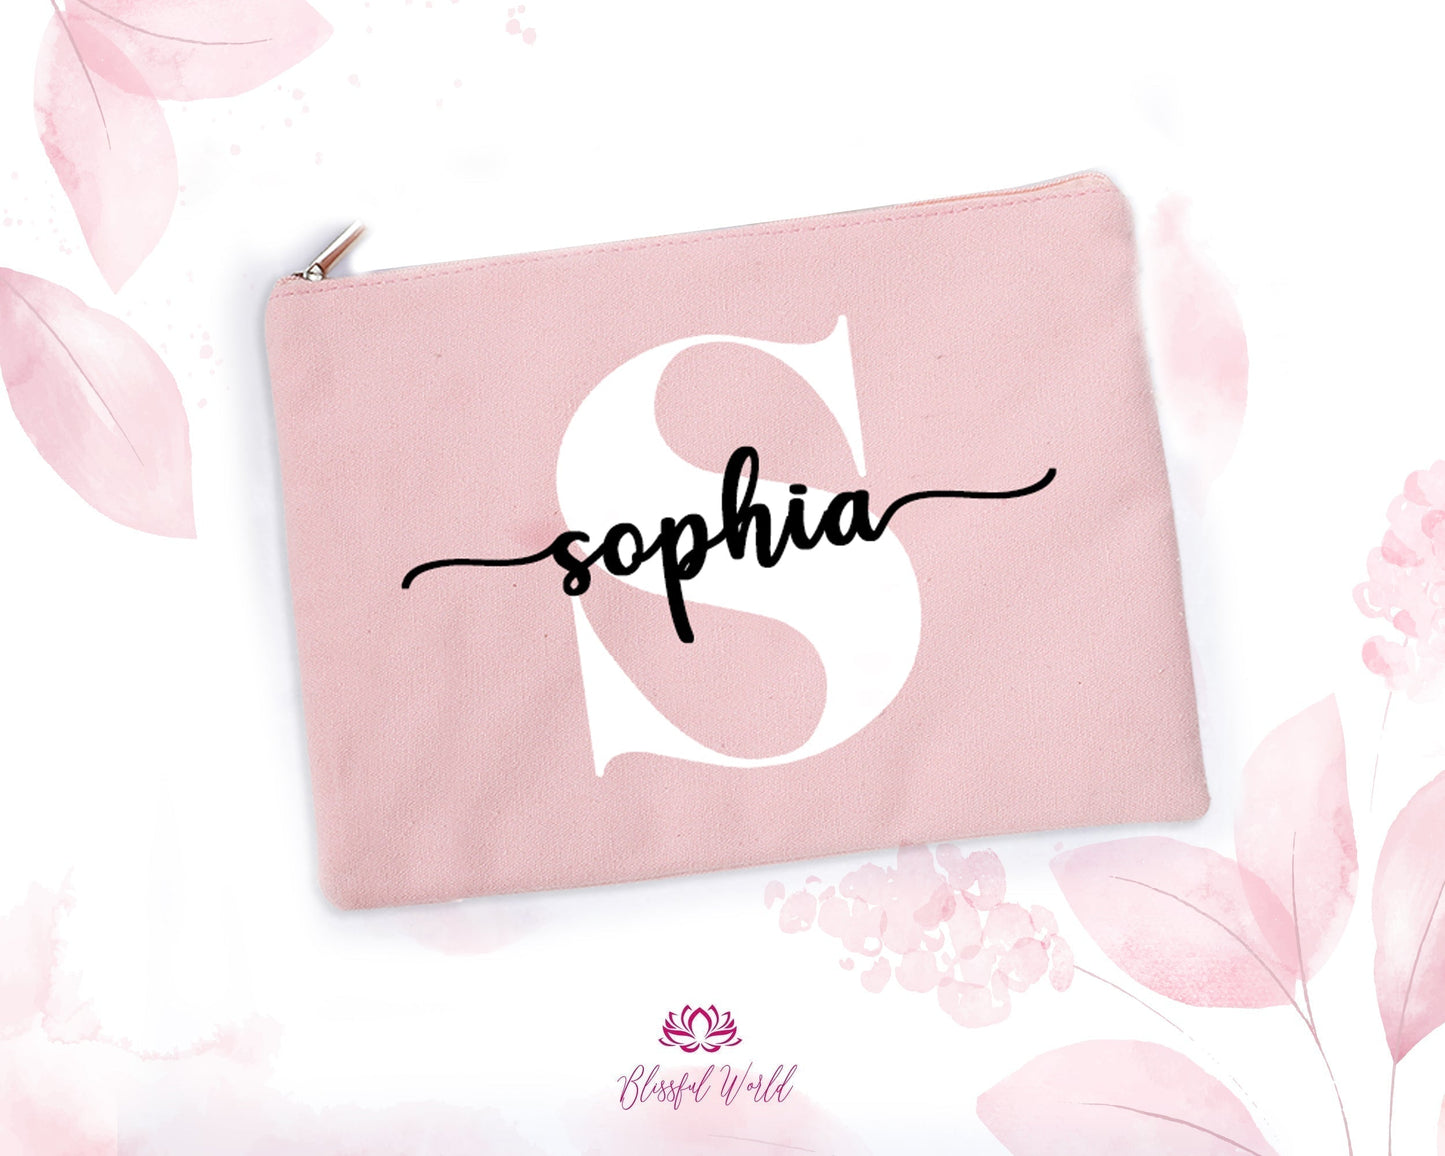 Personalized Makeup Bag, Best Friend Gift, Toiletry Bag, Purse Organizer,Bridesmaid Gift Ideas, Monogrammed Wristlet,Bridal Party Gift